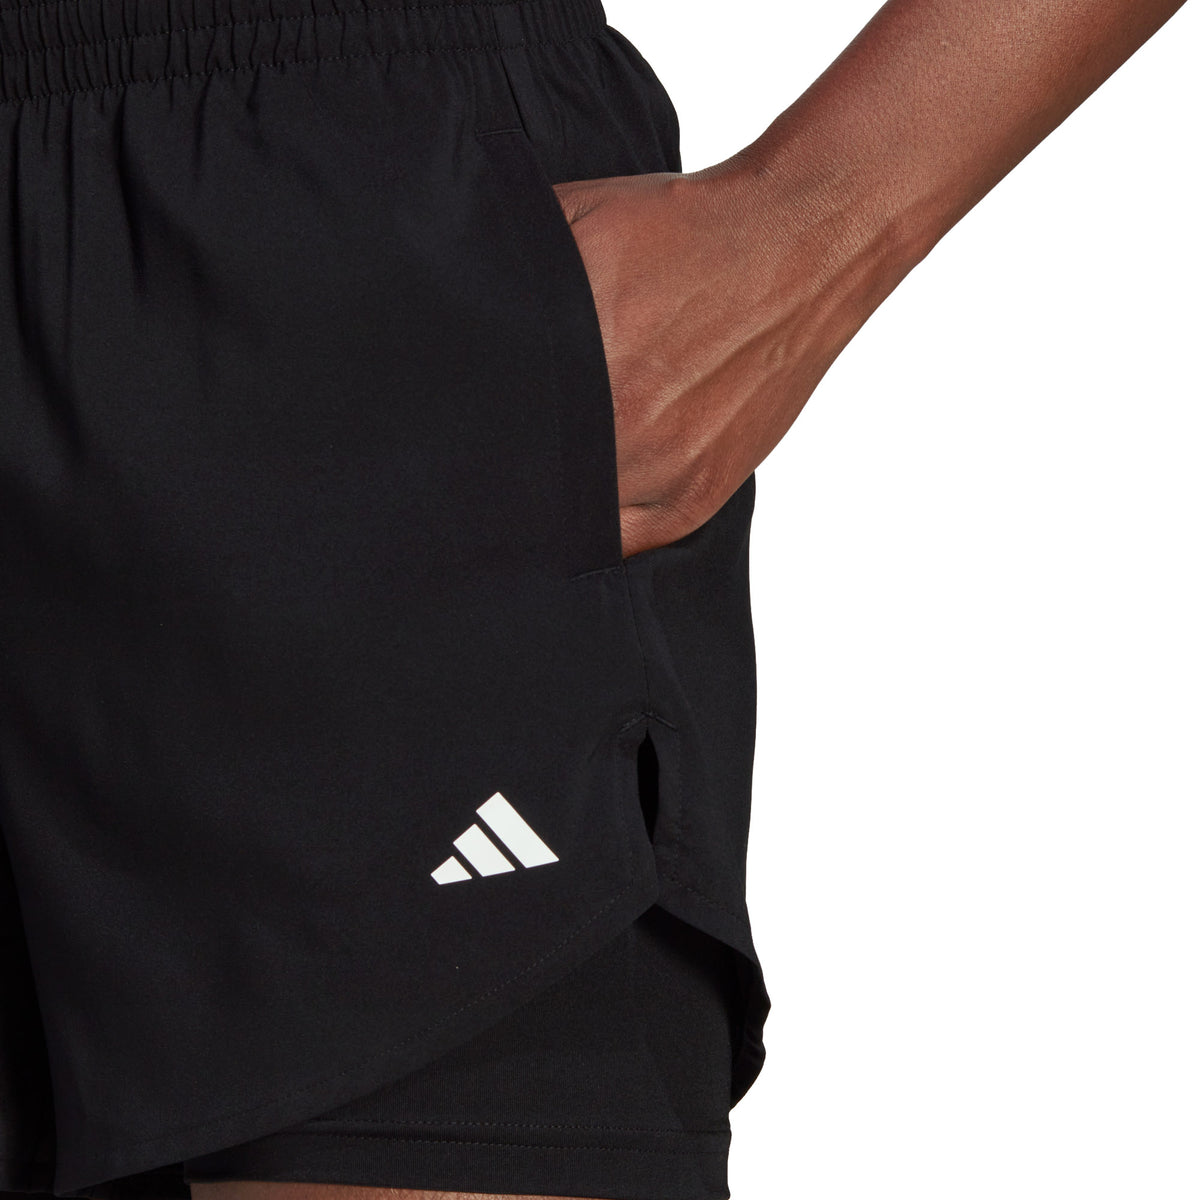 adidas Made For Training 2 in 1 Womens Short